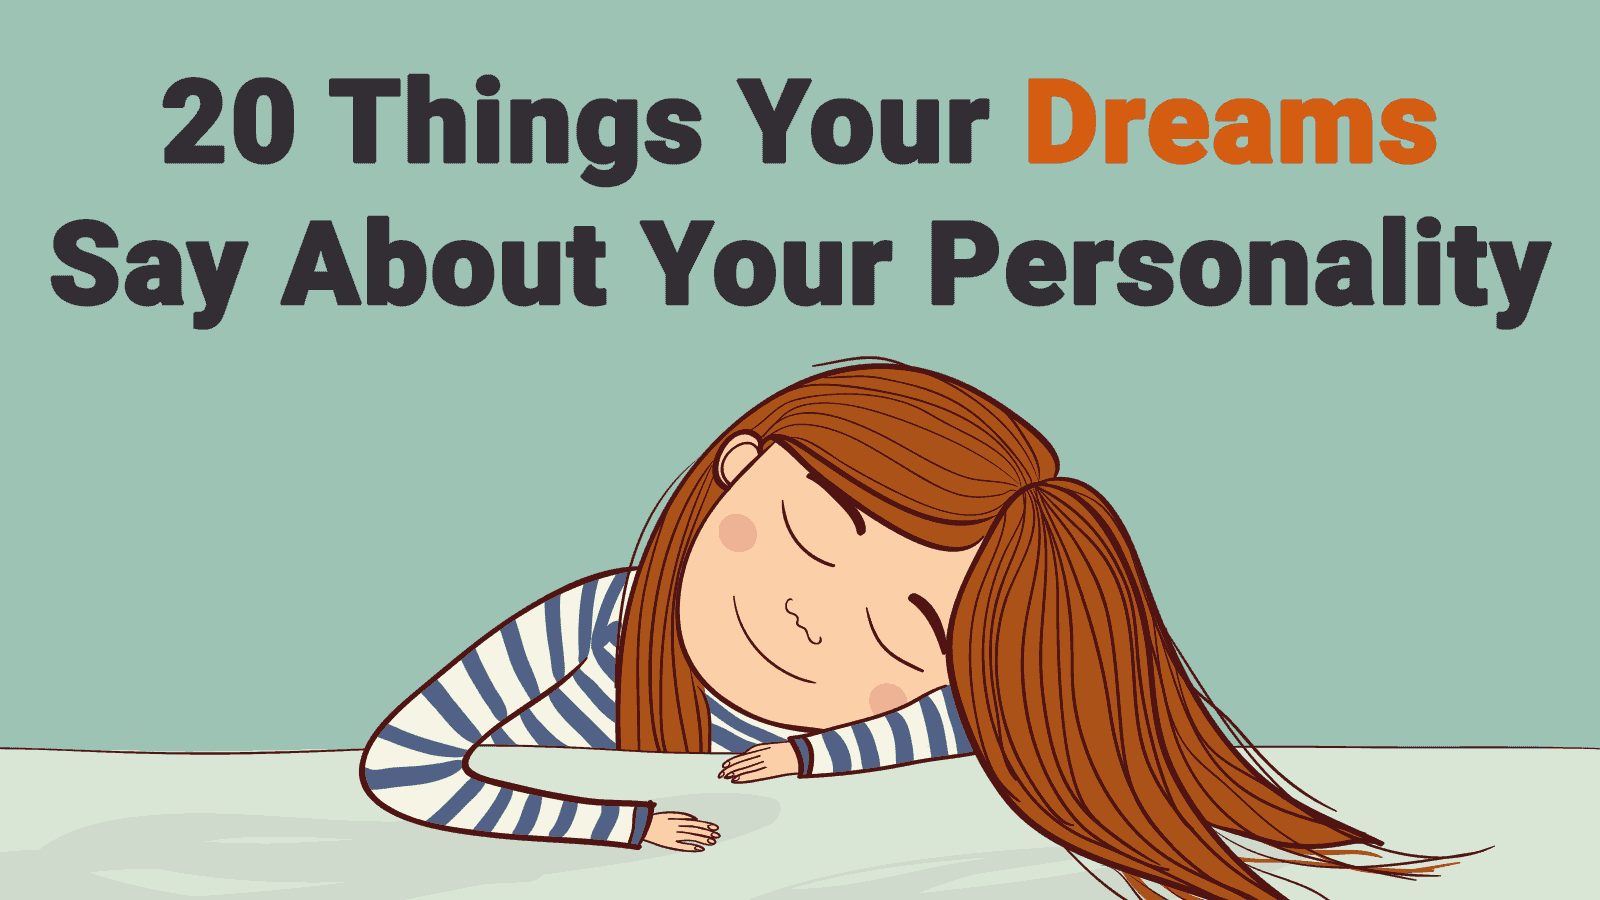 20 Things Your Dreams Say About Your Personality